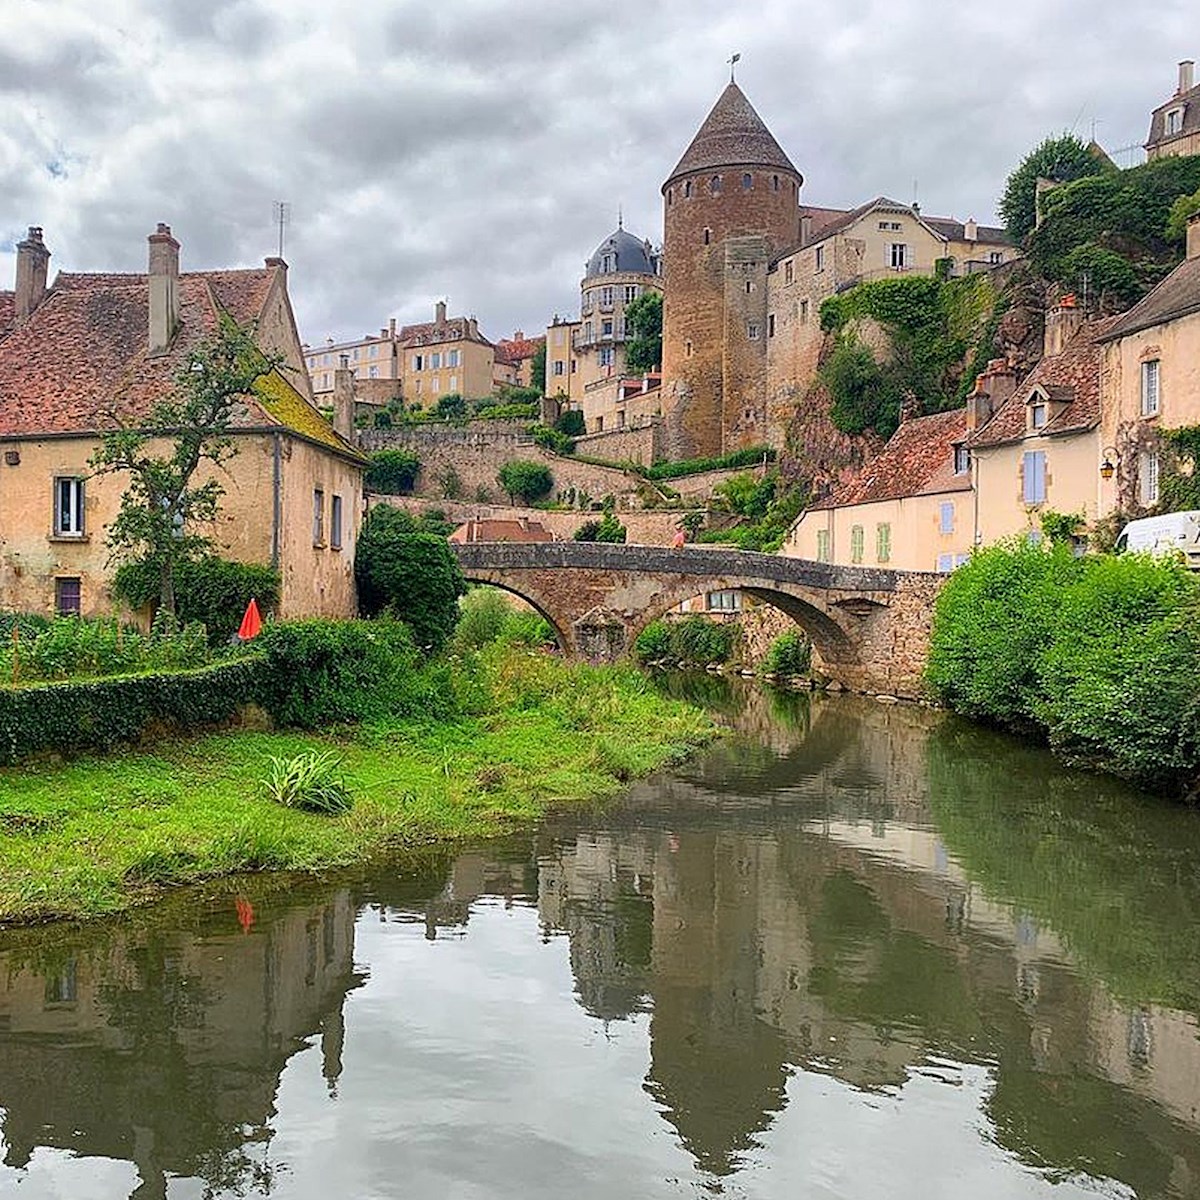 Small town in Burgundy region, France